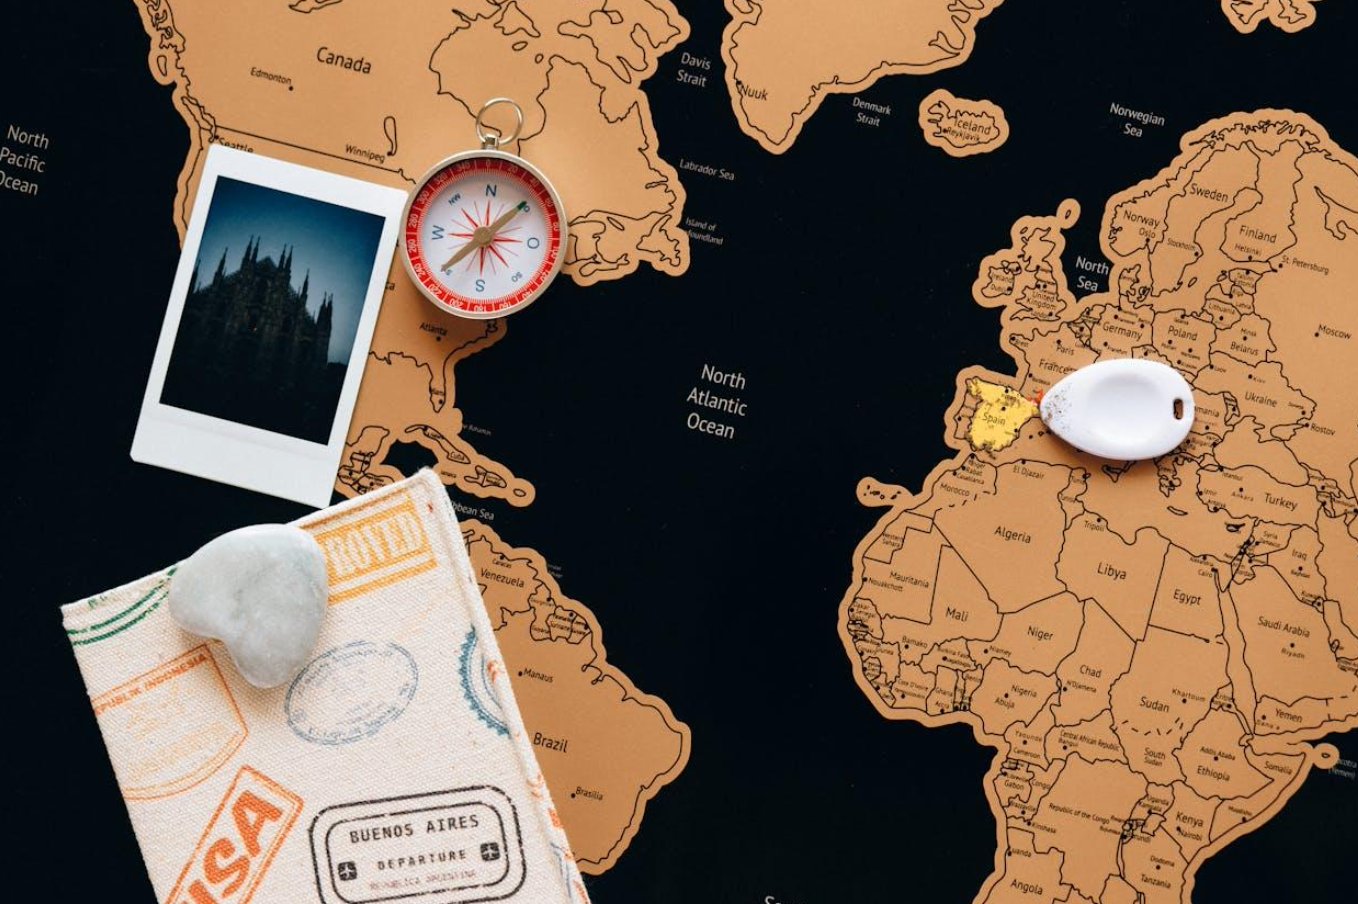 Map of the world with travel items laying on it; image by Nataliya Vaitkevich, via Pexels.com.